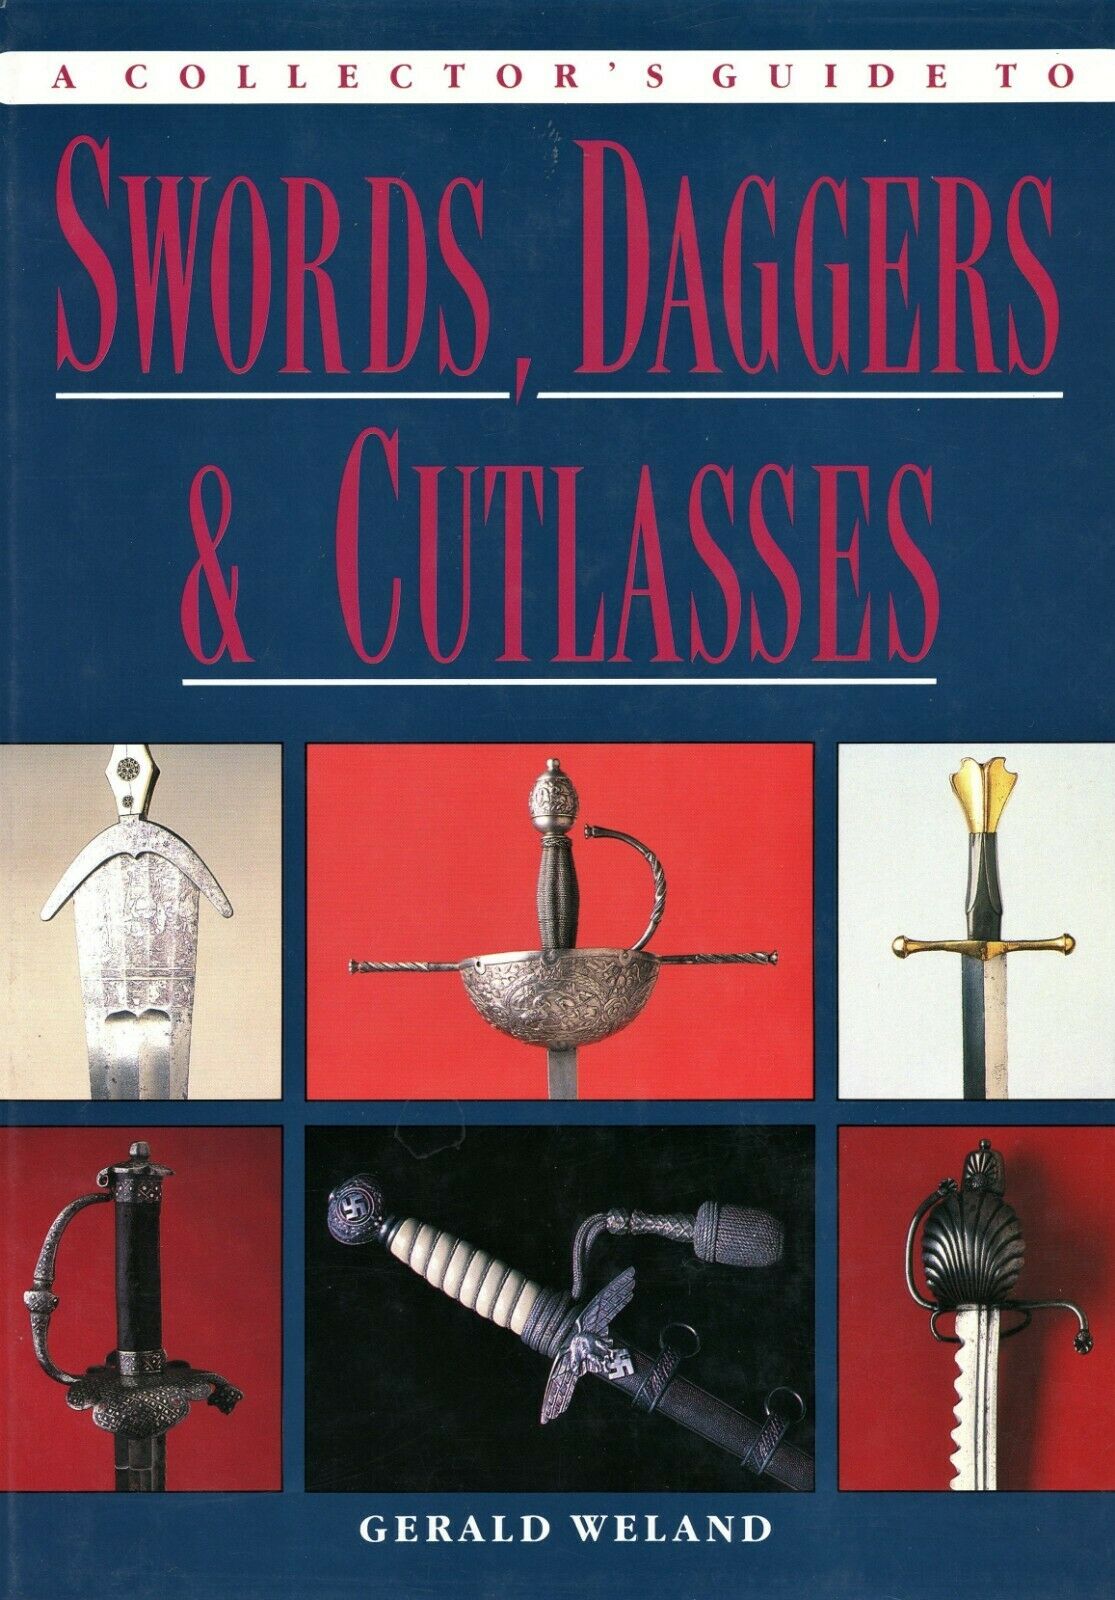 Collectible Swords Daggers Dirks Knives Cutlasses / Illustrated Book